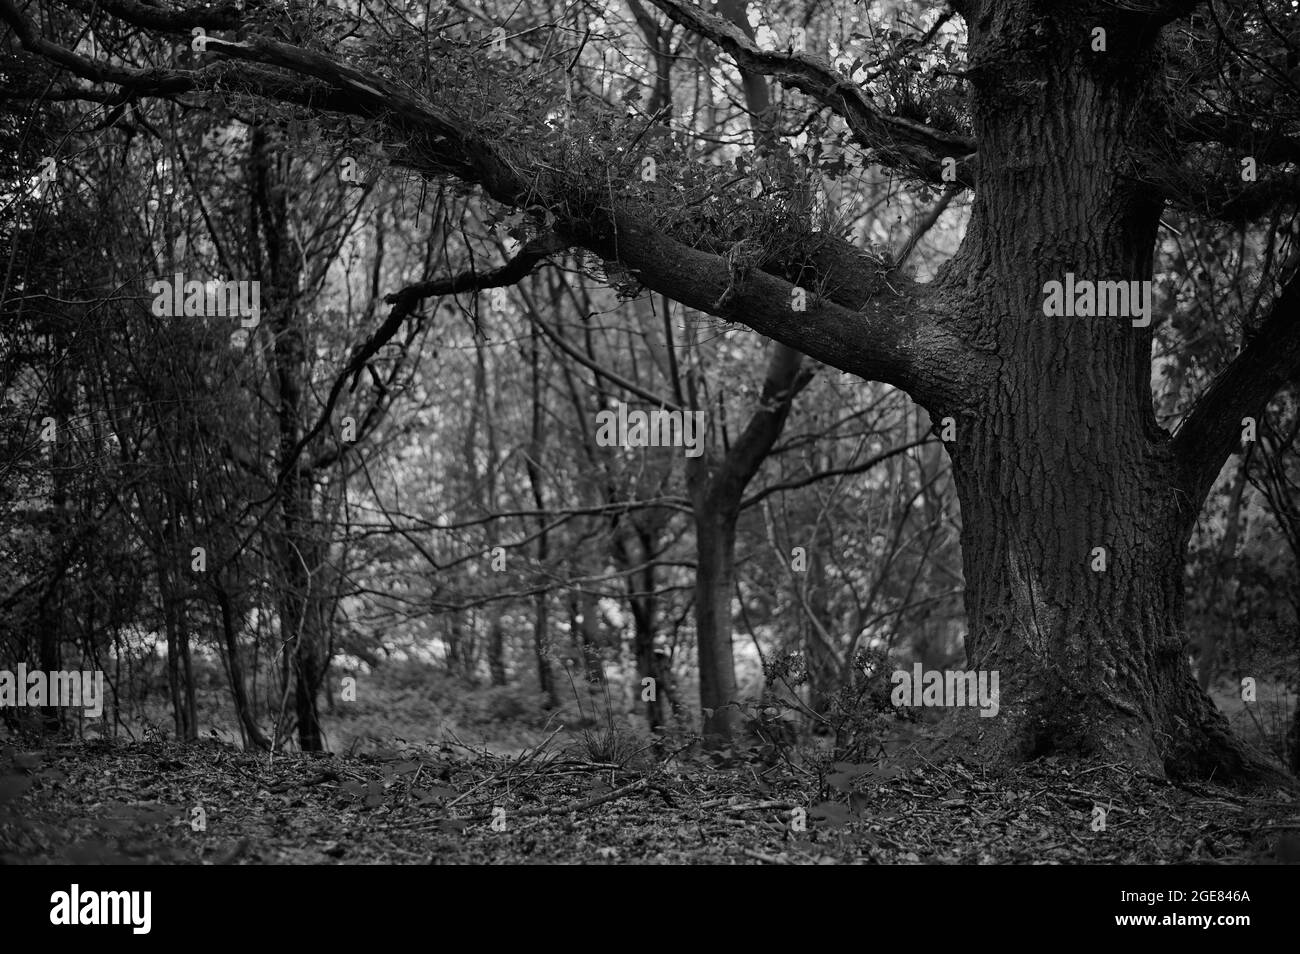 Black and white monochrome image of big old tree in an english forest with leaves on the ground Stock Photo